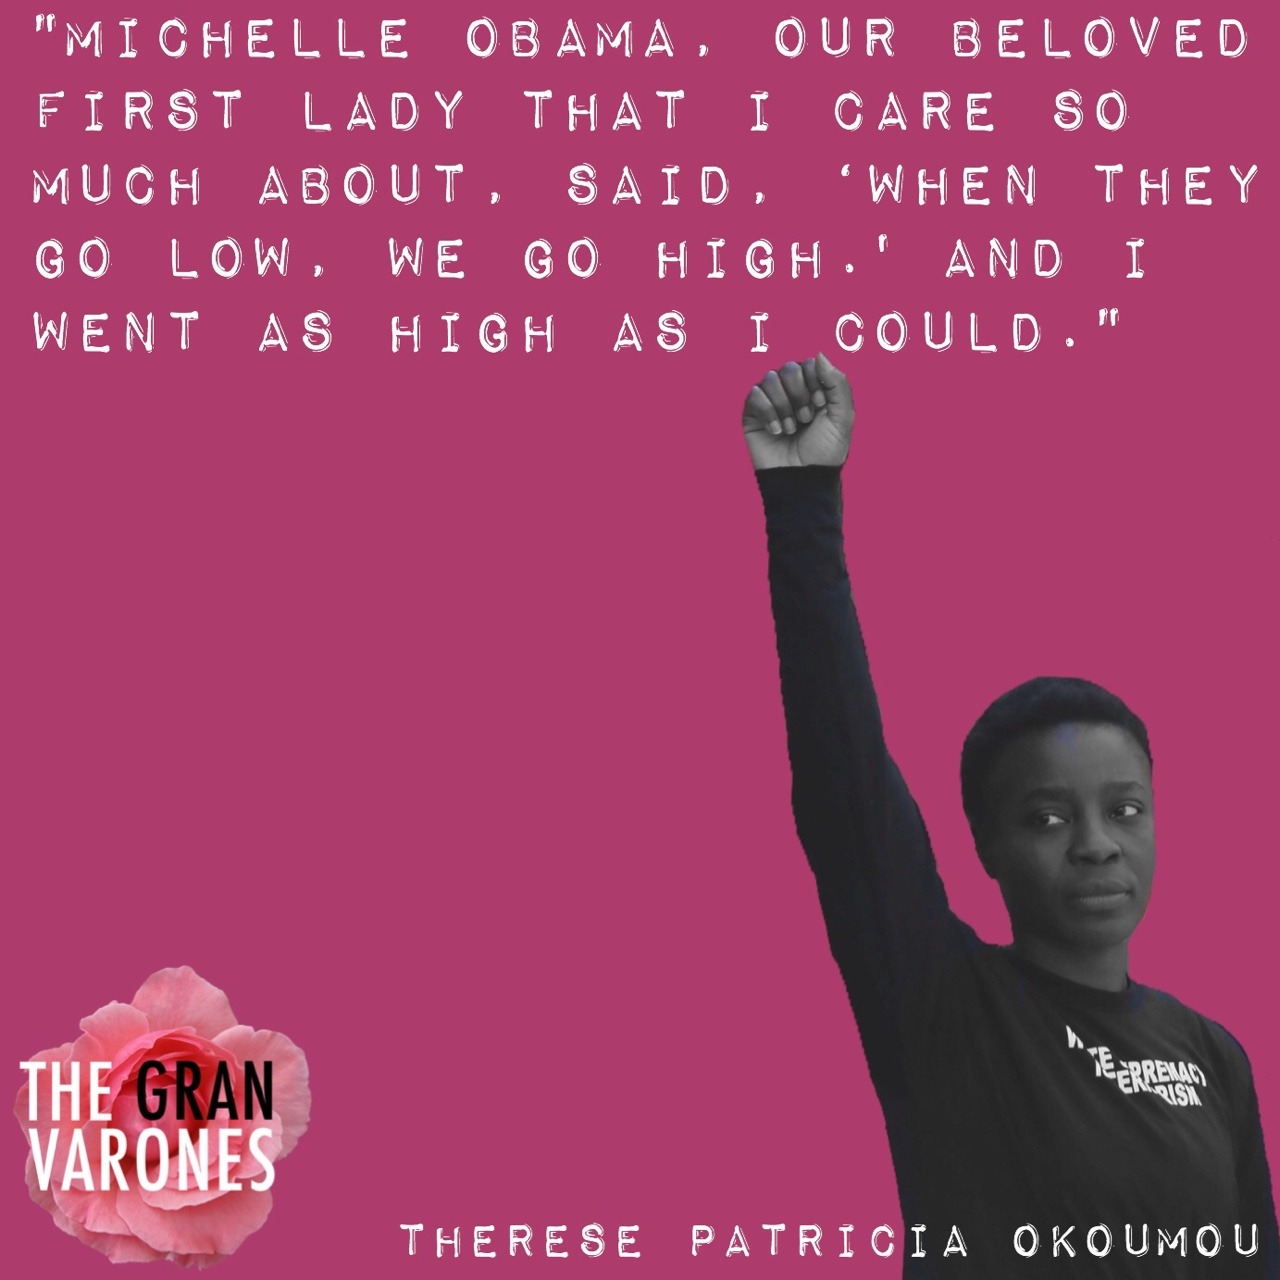 “Michelle Obama, our beloved First Lady that I care so much about, said: ‘When they go low, we go high.’ And I went as high as I could.”
Therese Patricia Okoumou